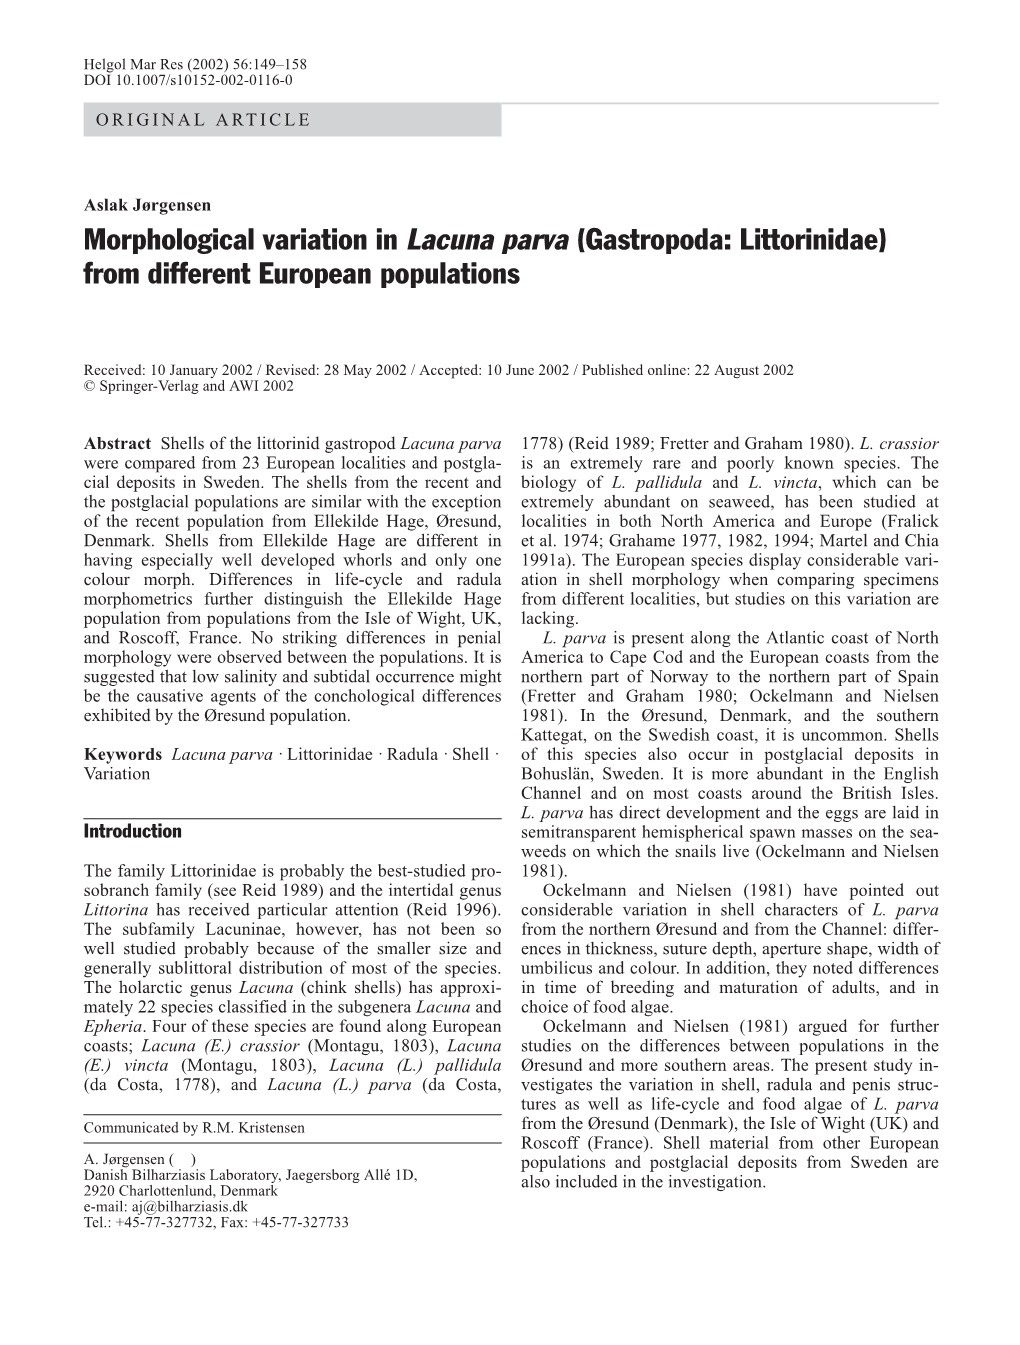 Morphological Variation in Lacuna Parva (Gastropoda: Littorinidae) from Different European Populations